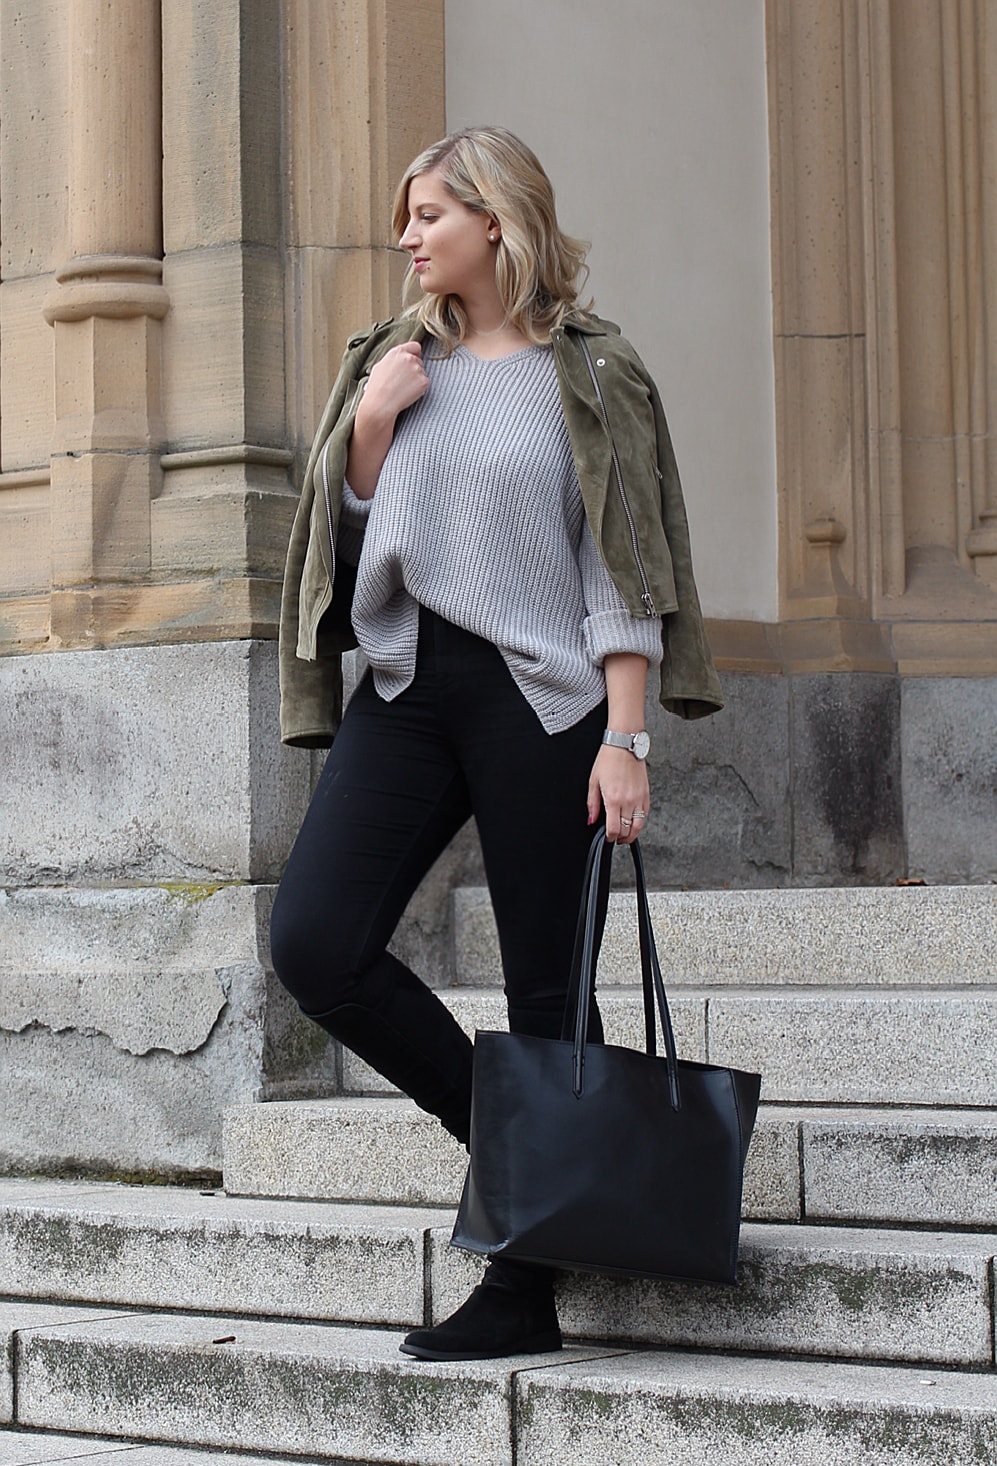 OUTFIT: Grauer Oversize-Pullover